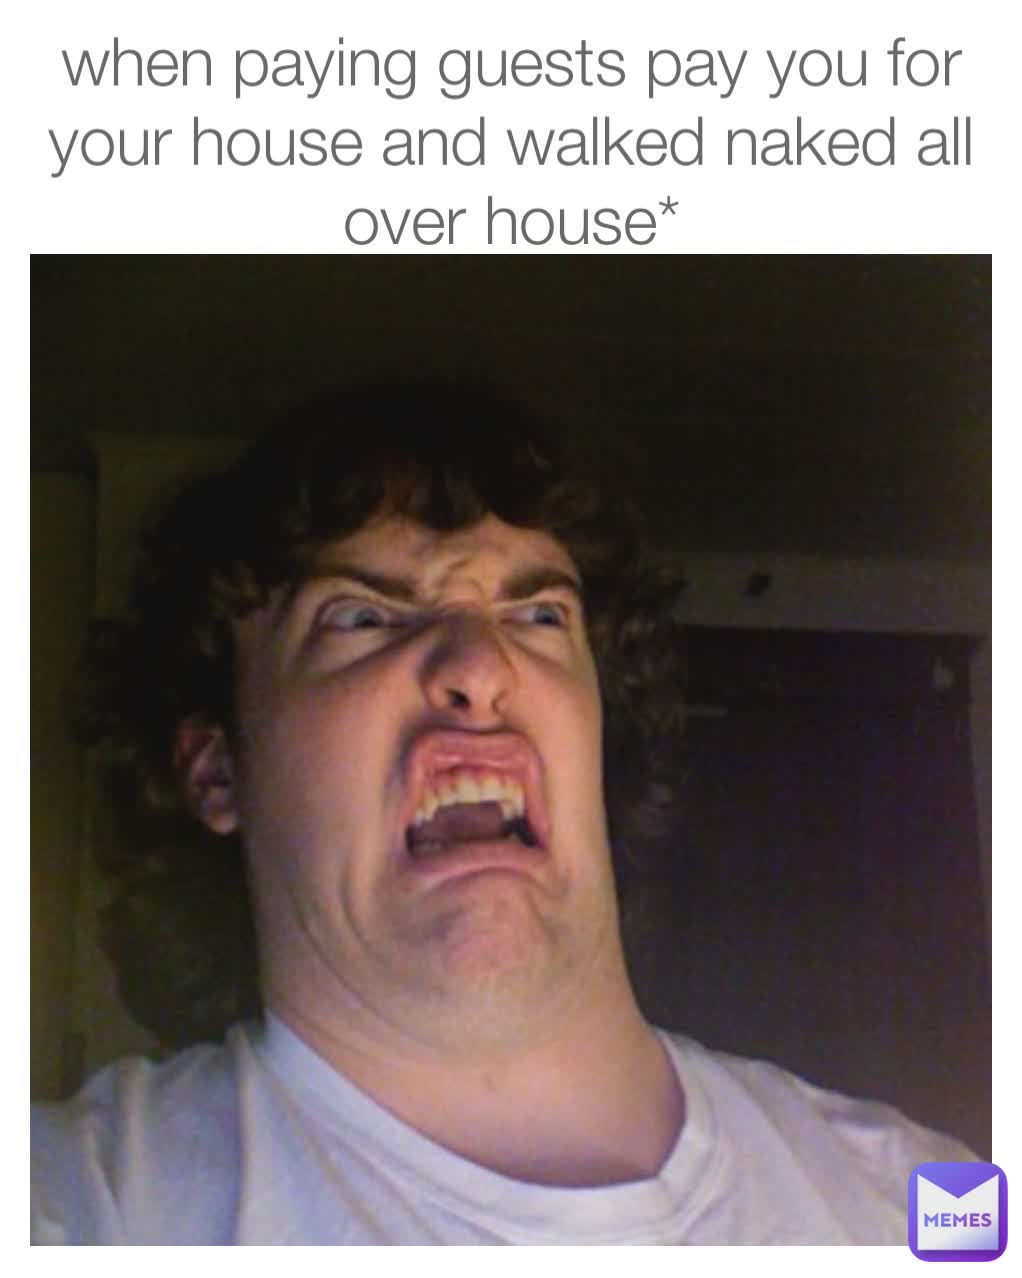 when paying guests pay you for your house and walked naked all over house*